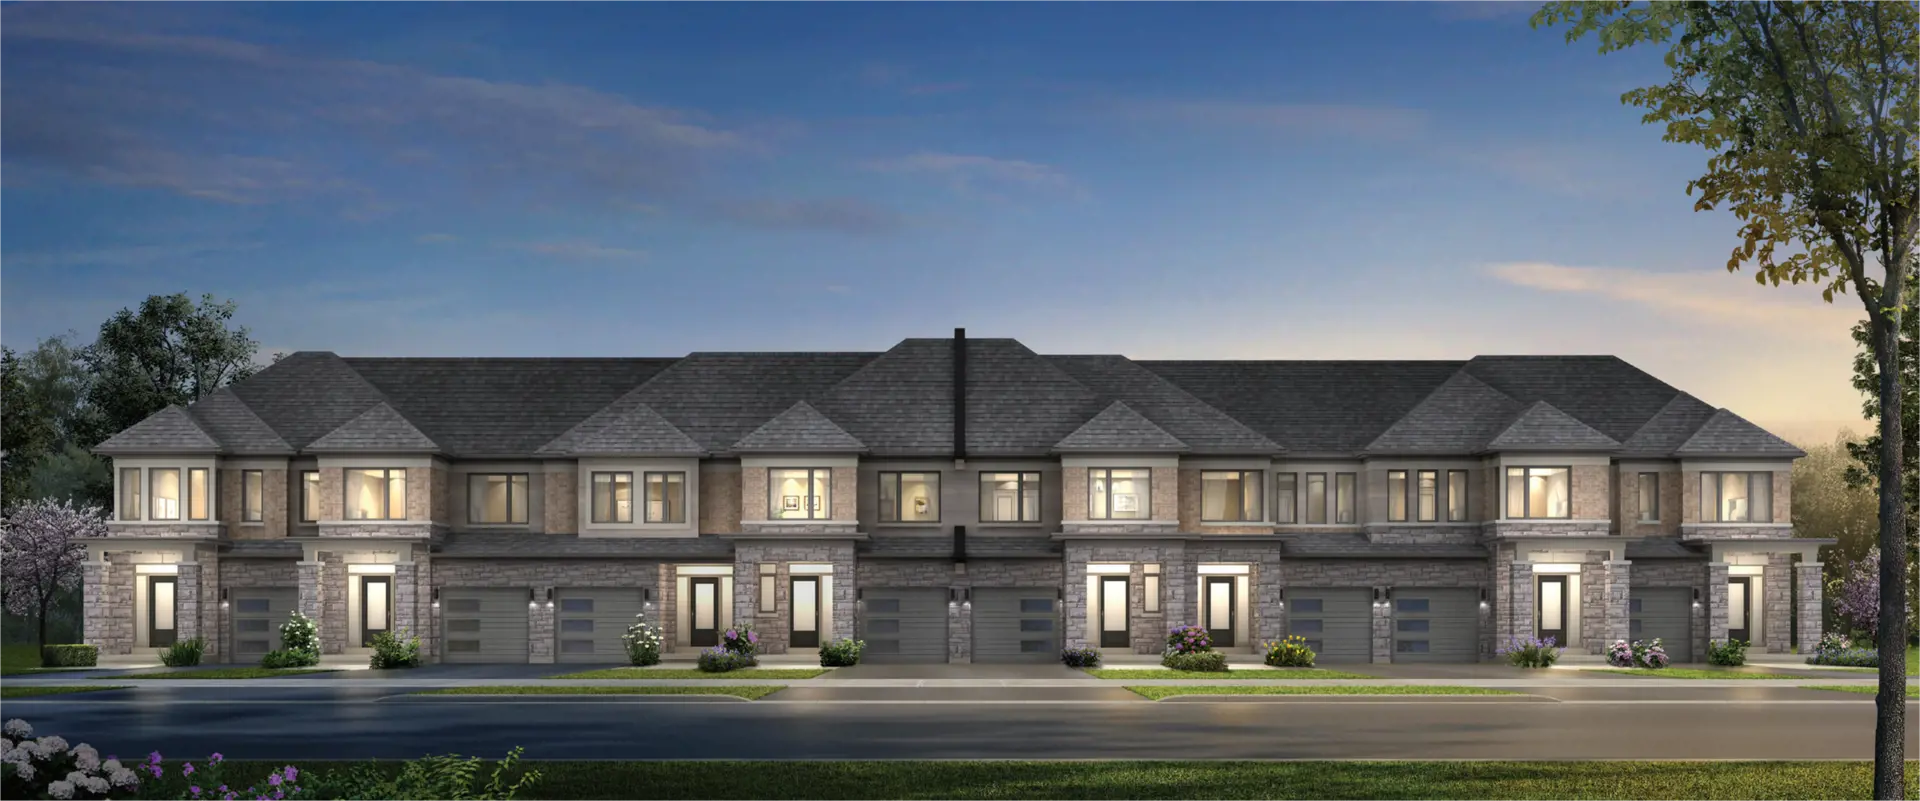 Mapleview Park is a new low rise condo complex by Fernbrook Homes and Tiffany Park Homes located in 2429 Mapleview Dr E, Barrie.